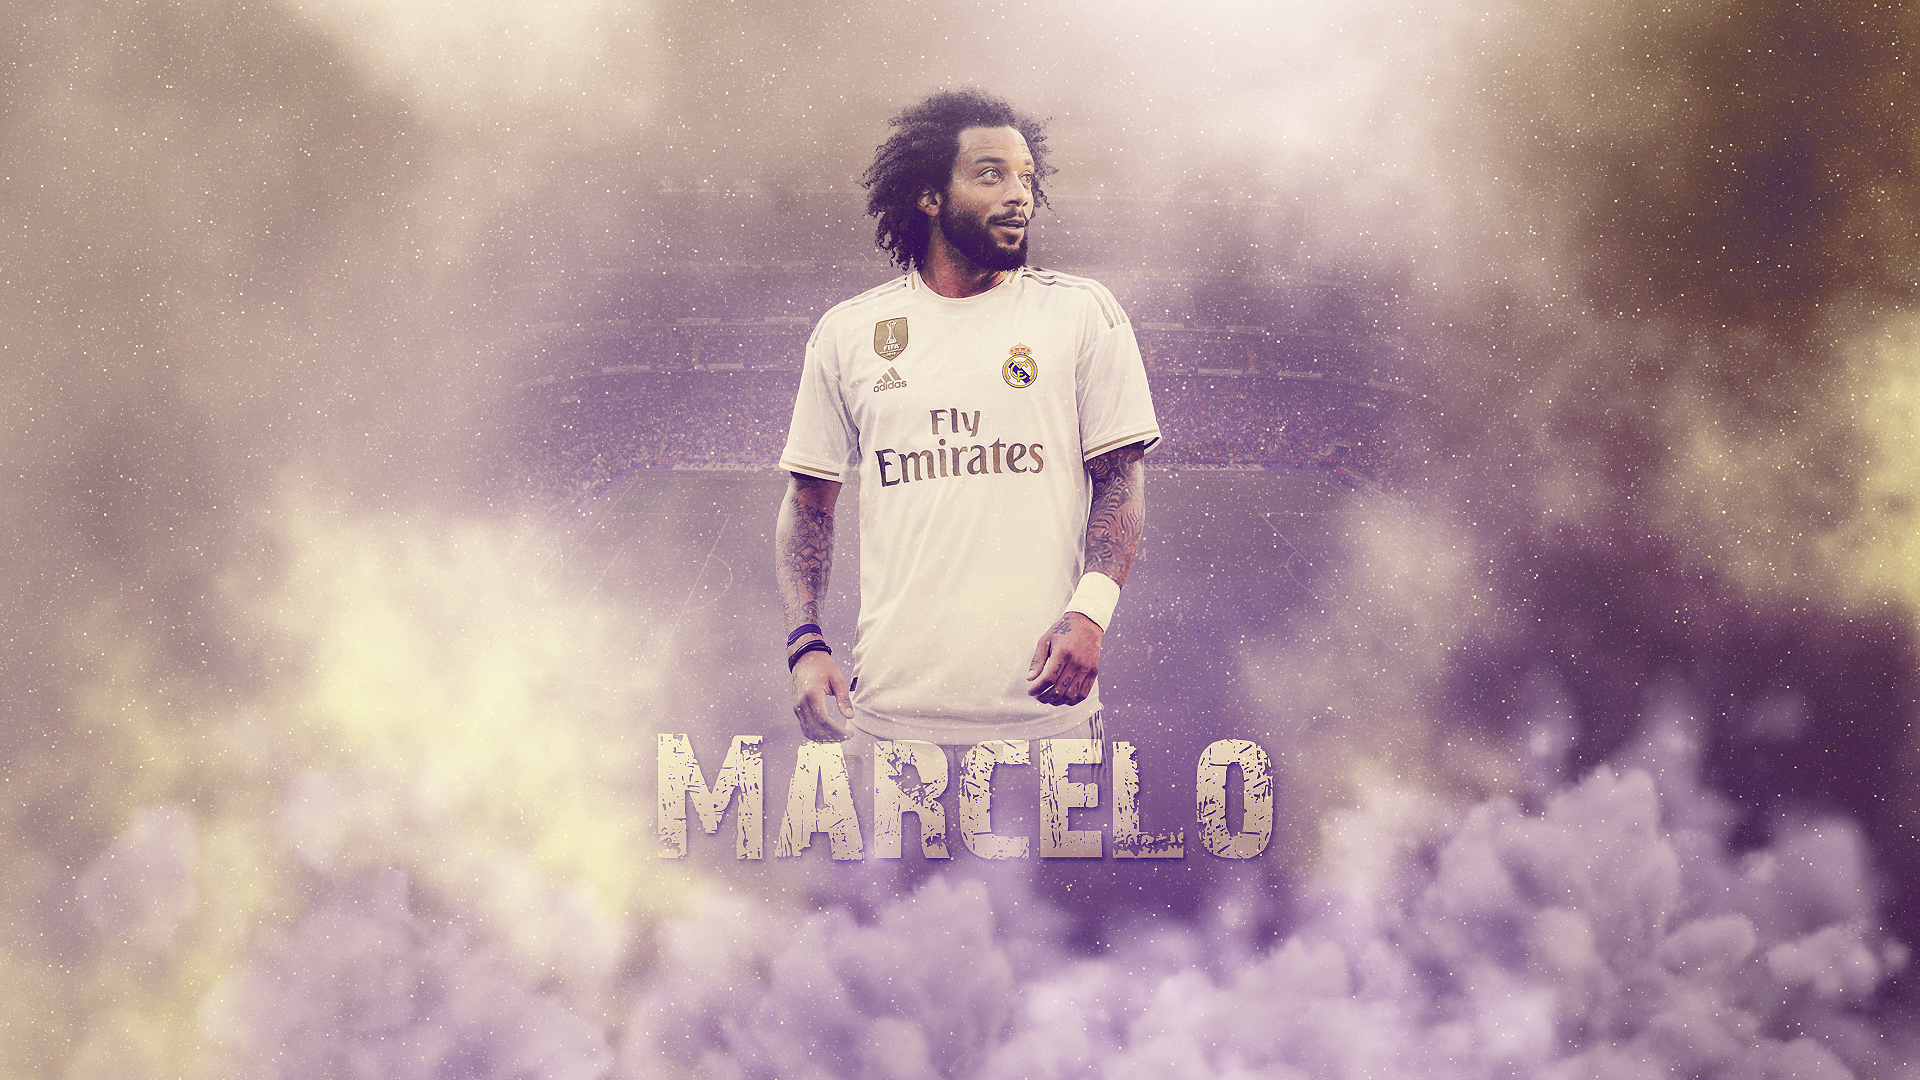 sports, marcelo vieira, real madrid c f, soccer